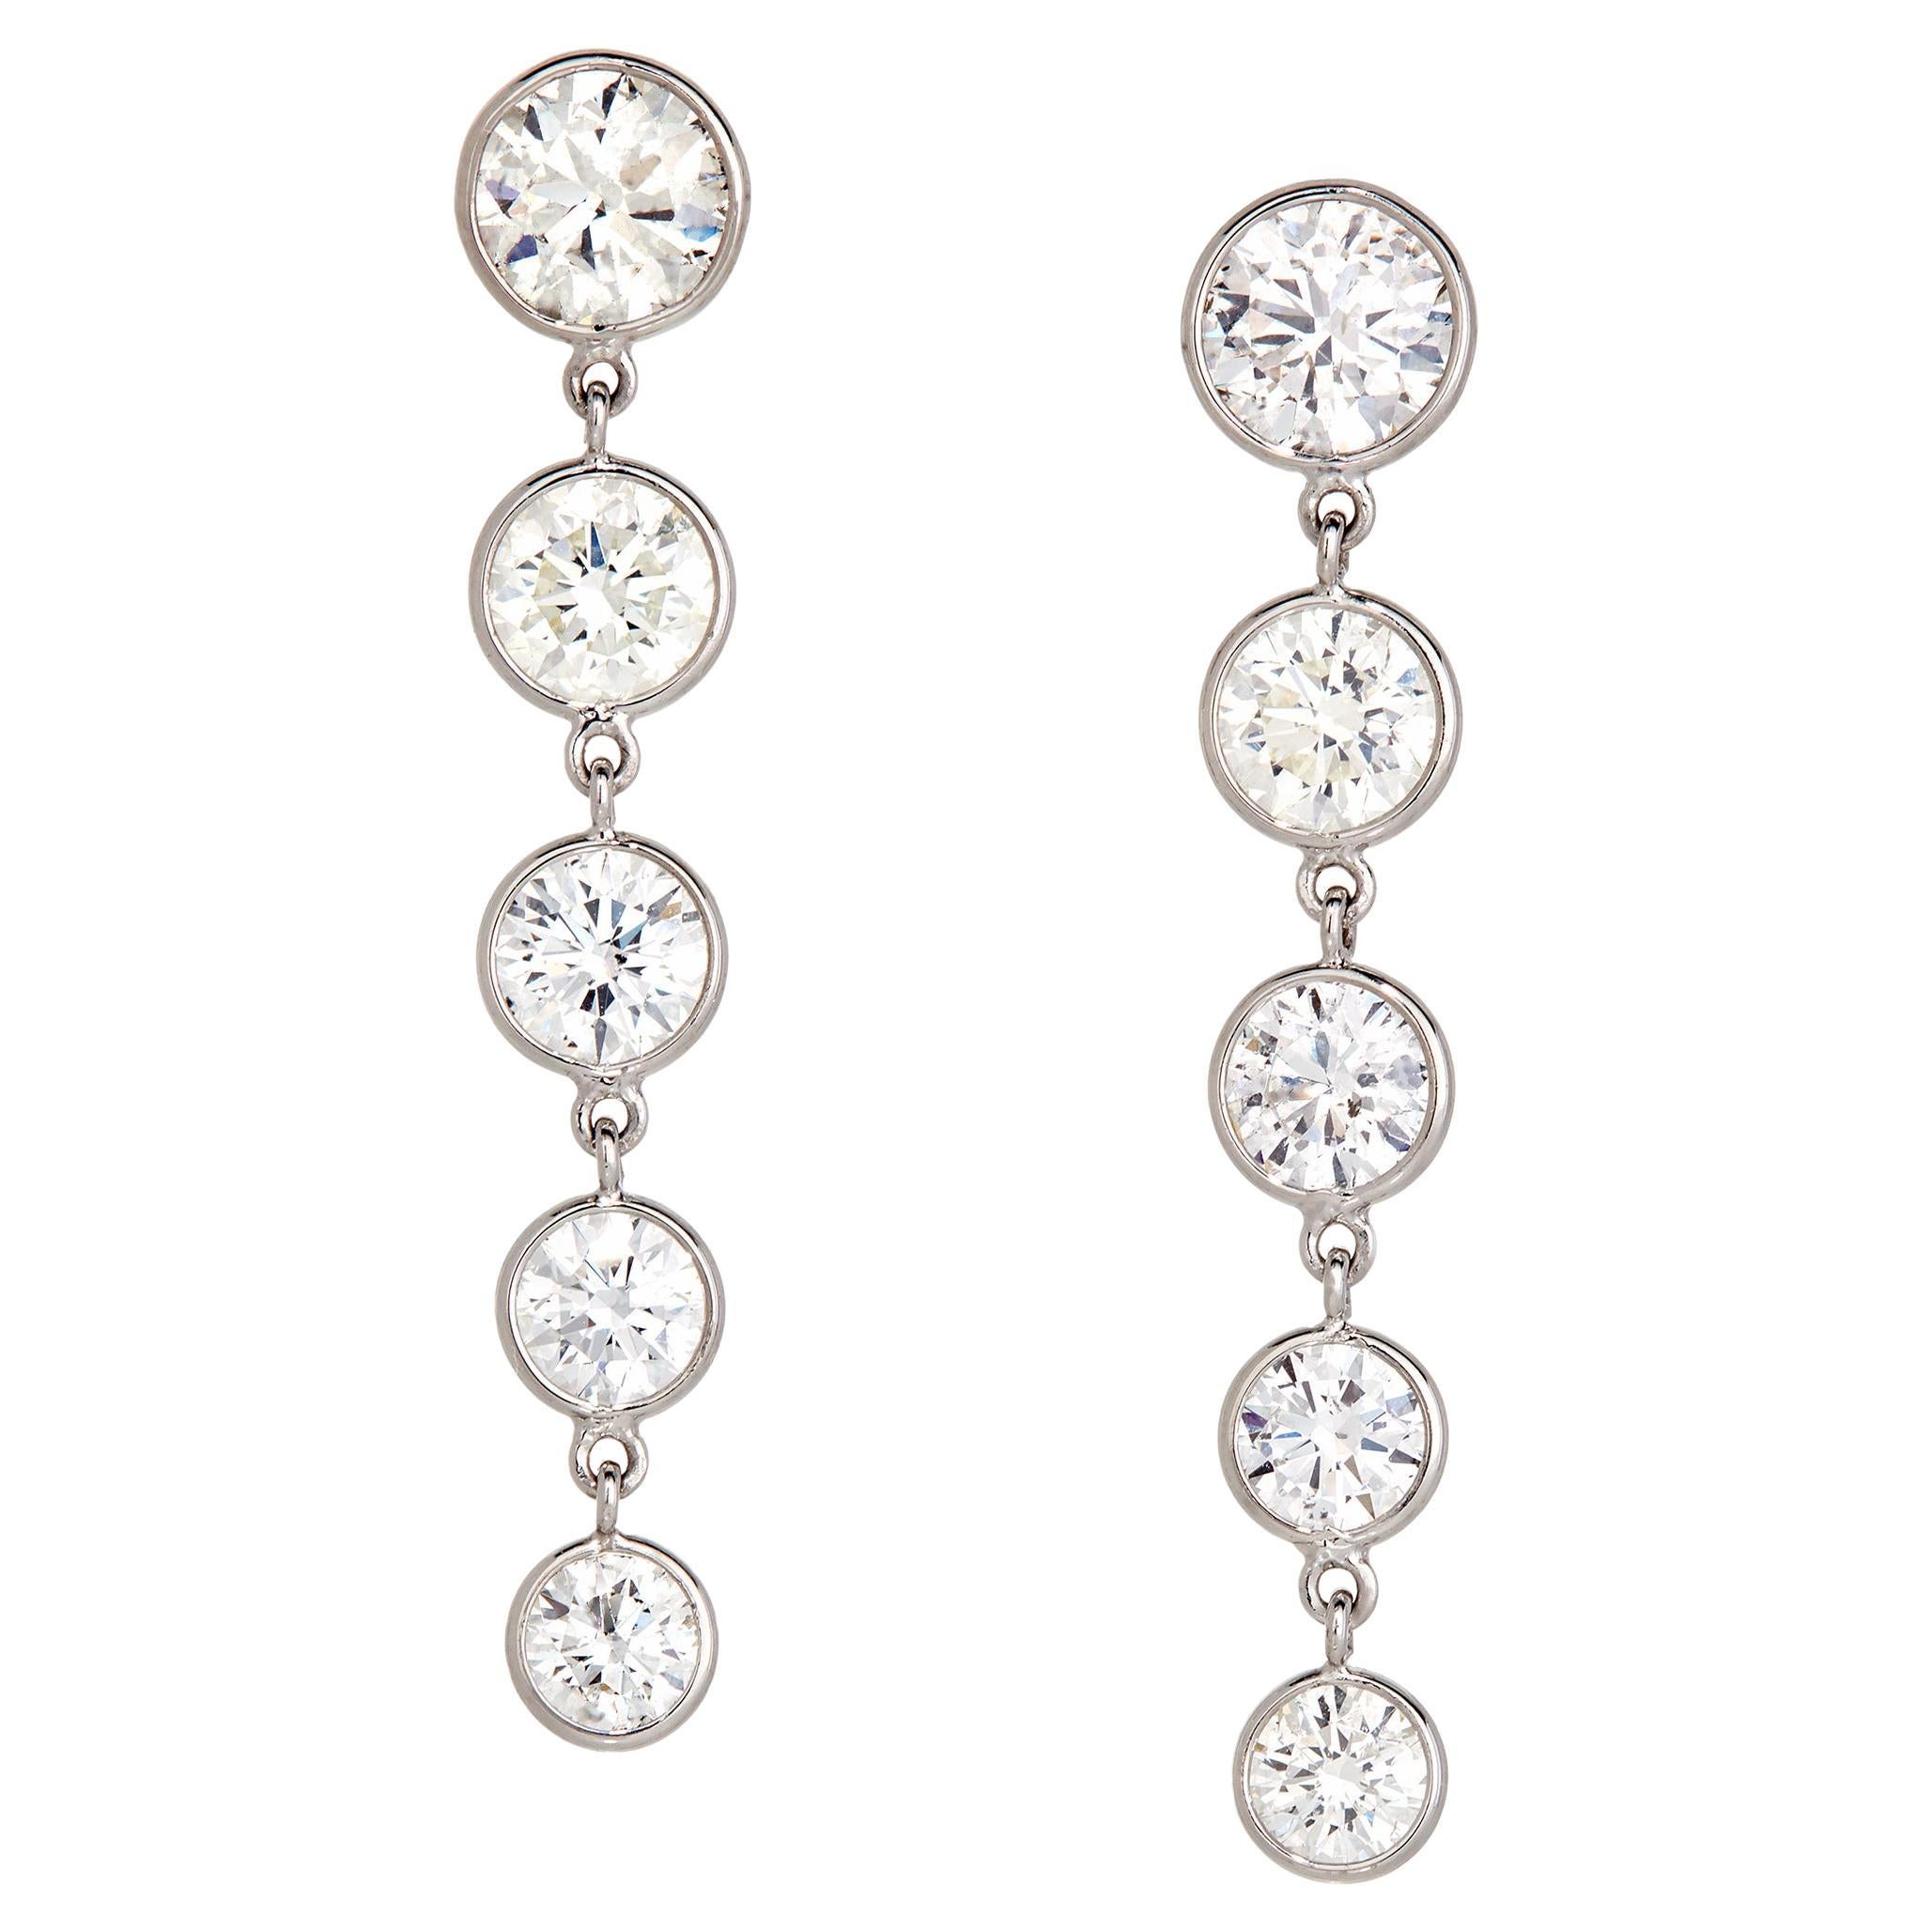 5.91 Carats Total Weight Diamond Earrings in Platinum